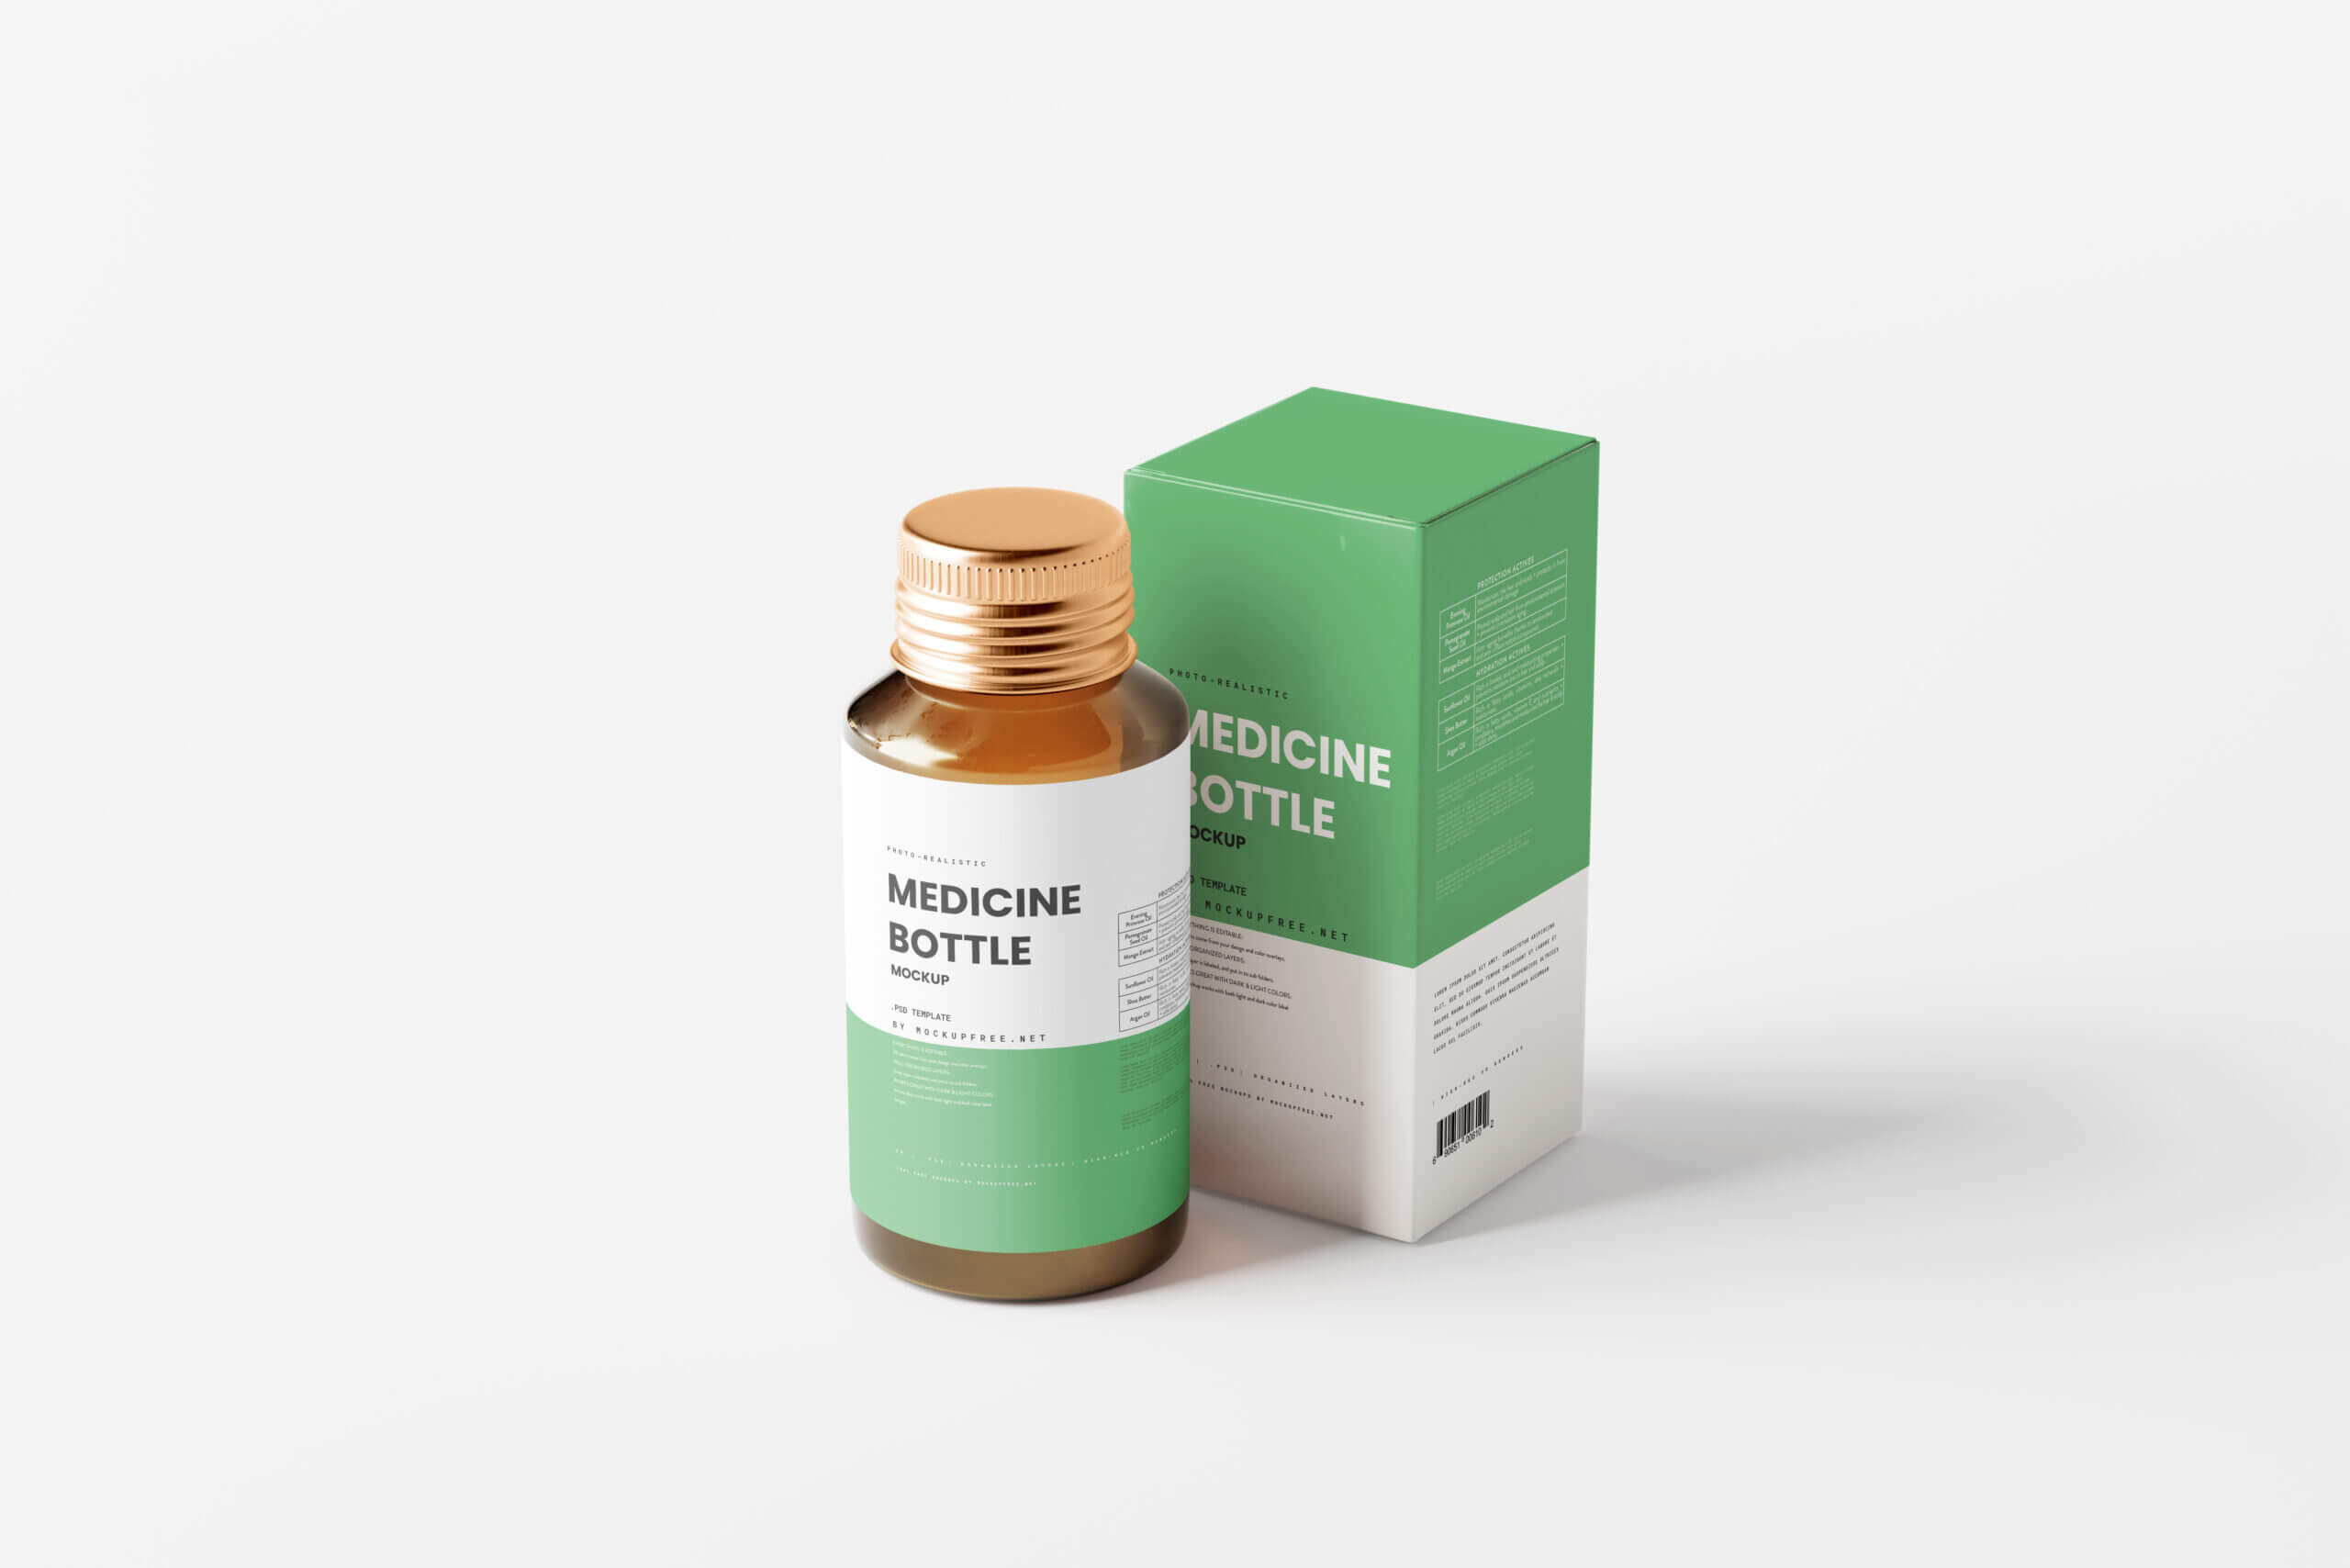 10 Free Amber Medicine Bottle With Box Mockup PSD Files10